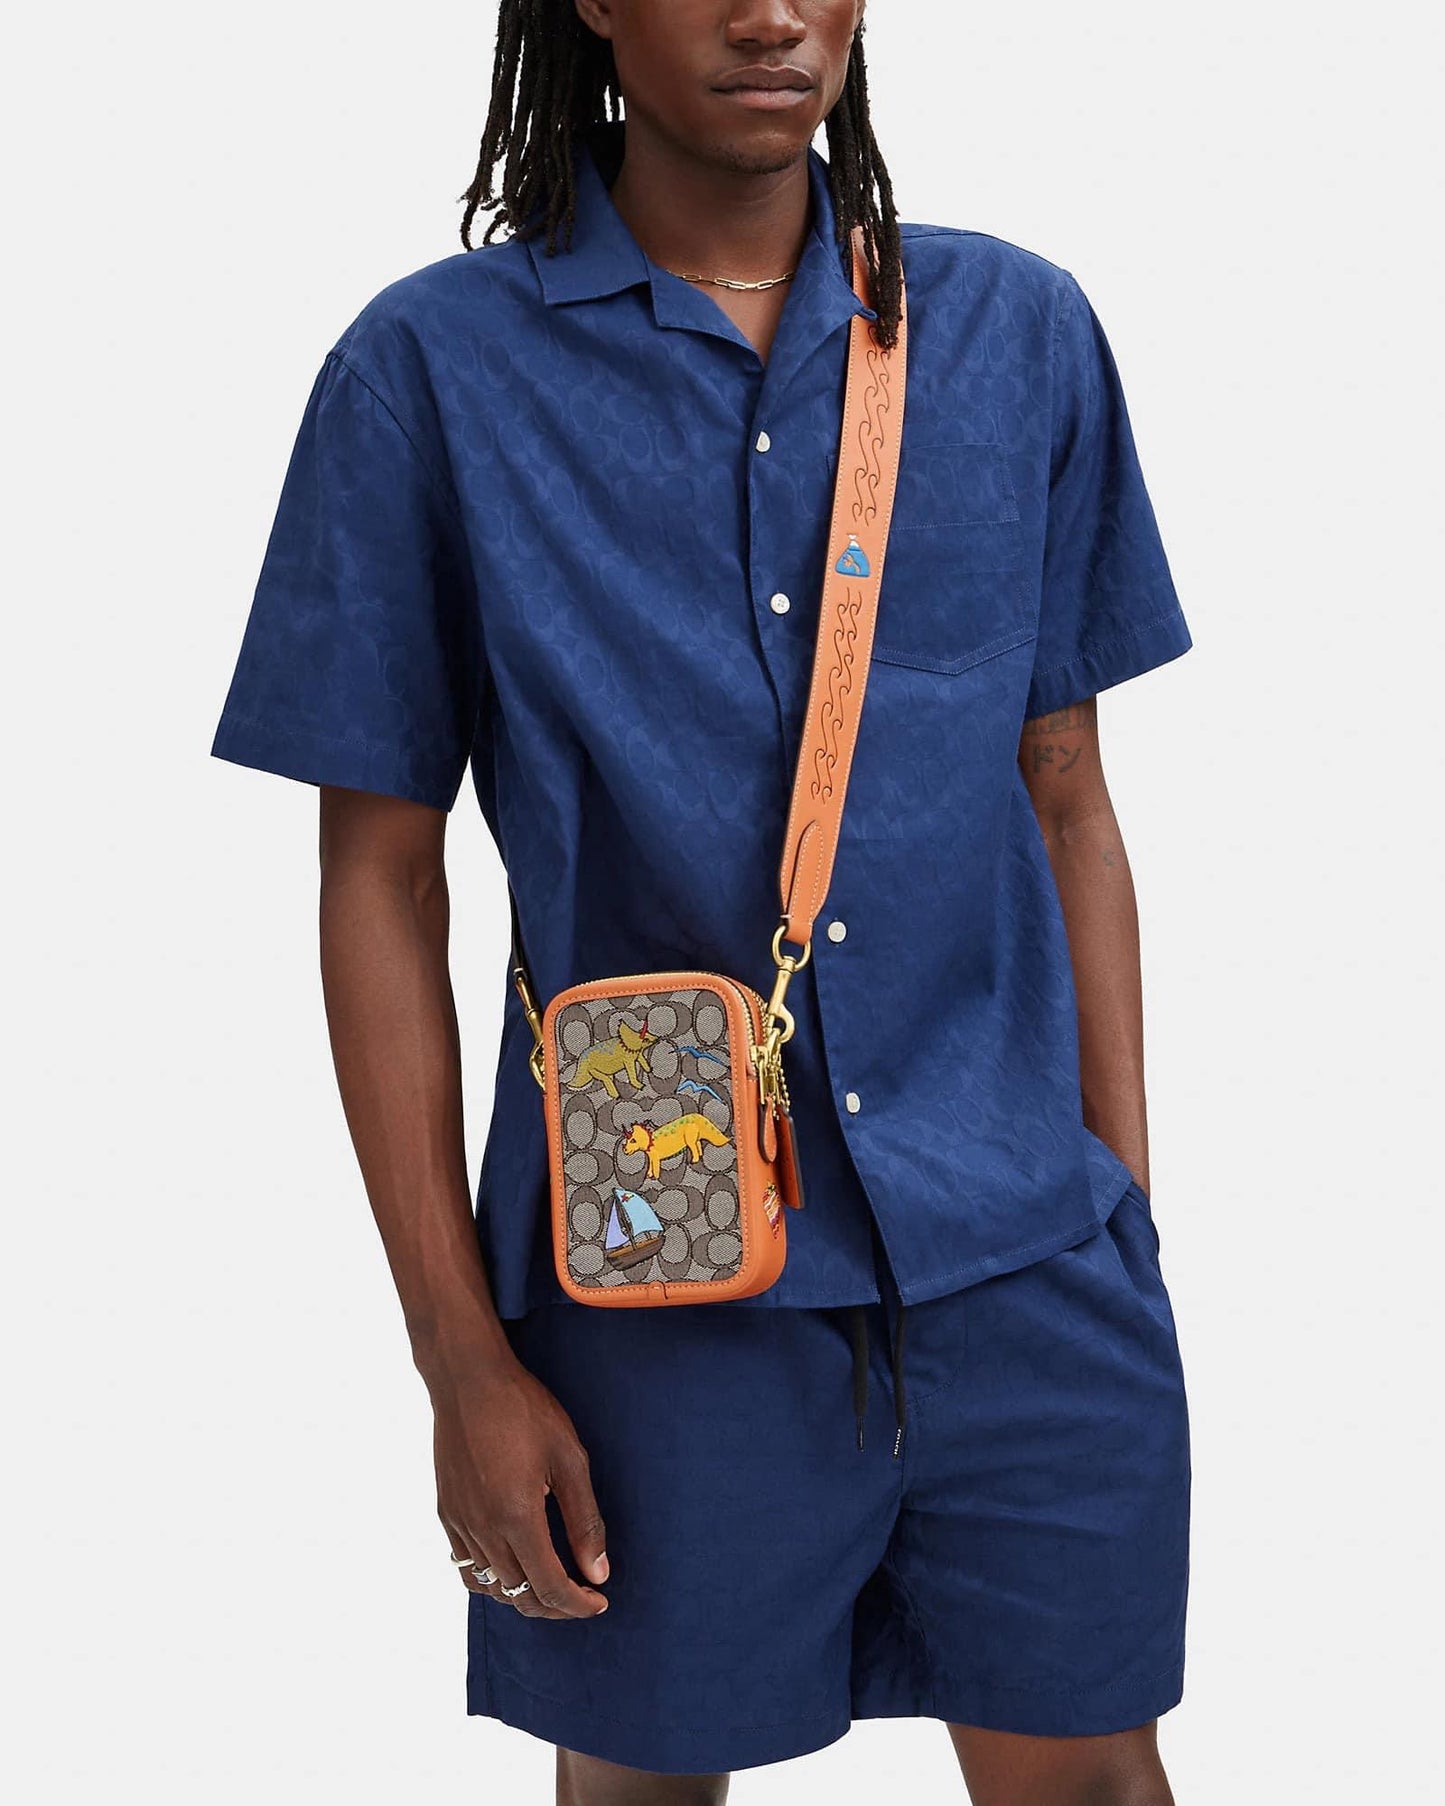 Coach X Observed By Us Rogue Crossbody 12 in Signature Jacquard